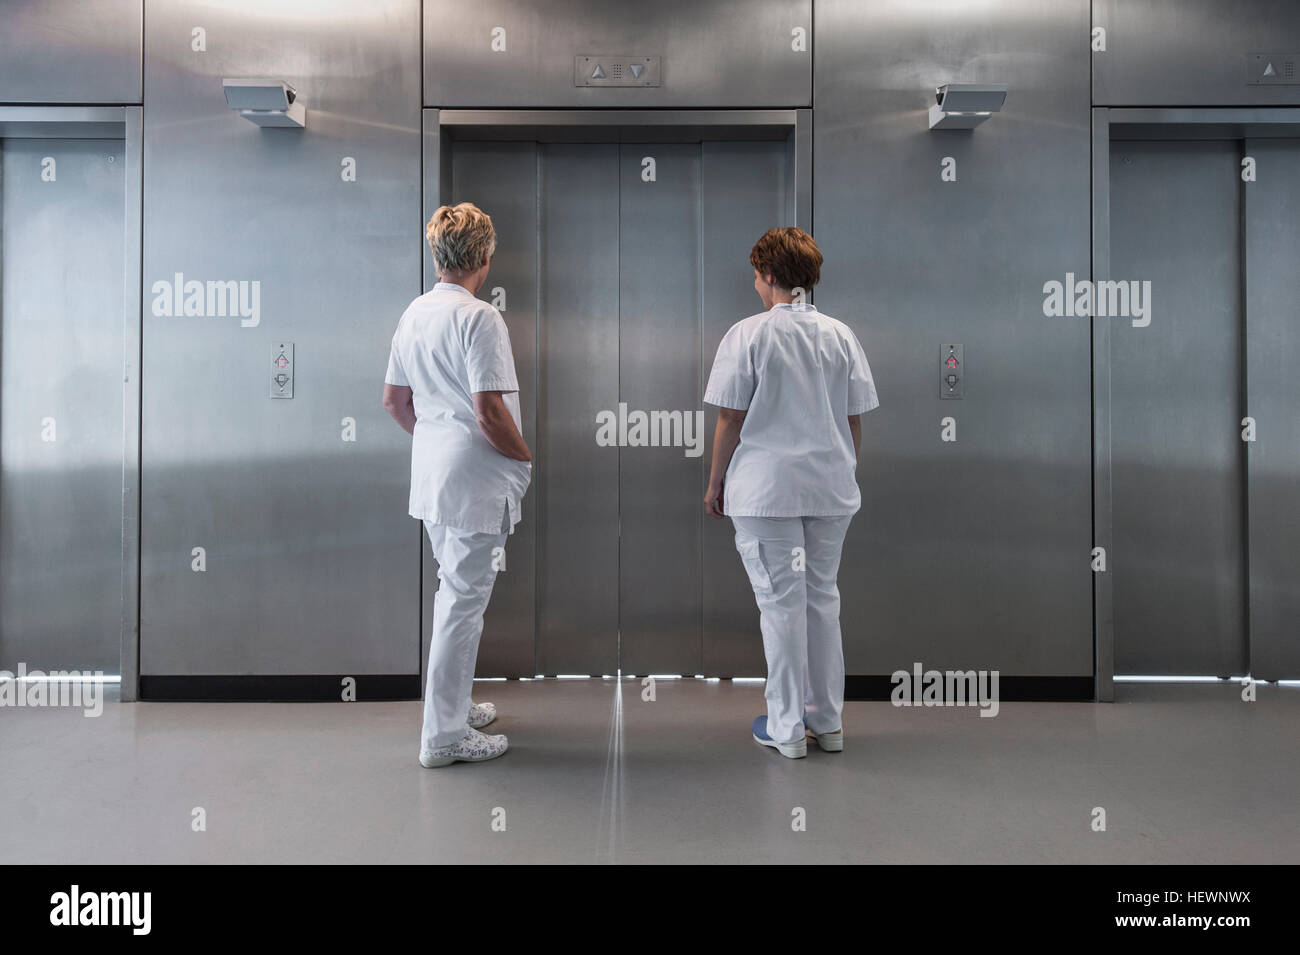 Rear view of nurses in hospital waiting for elevator Stock Photo